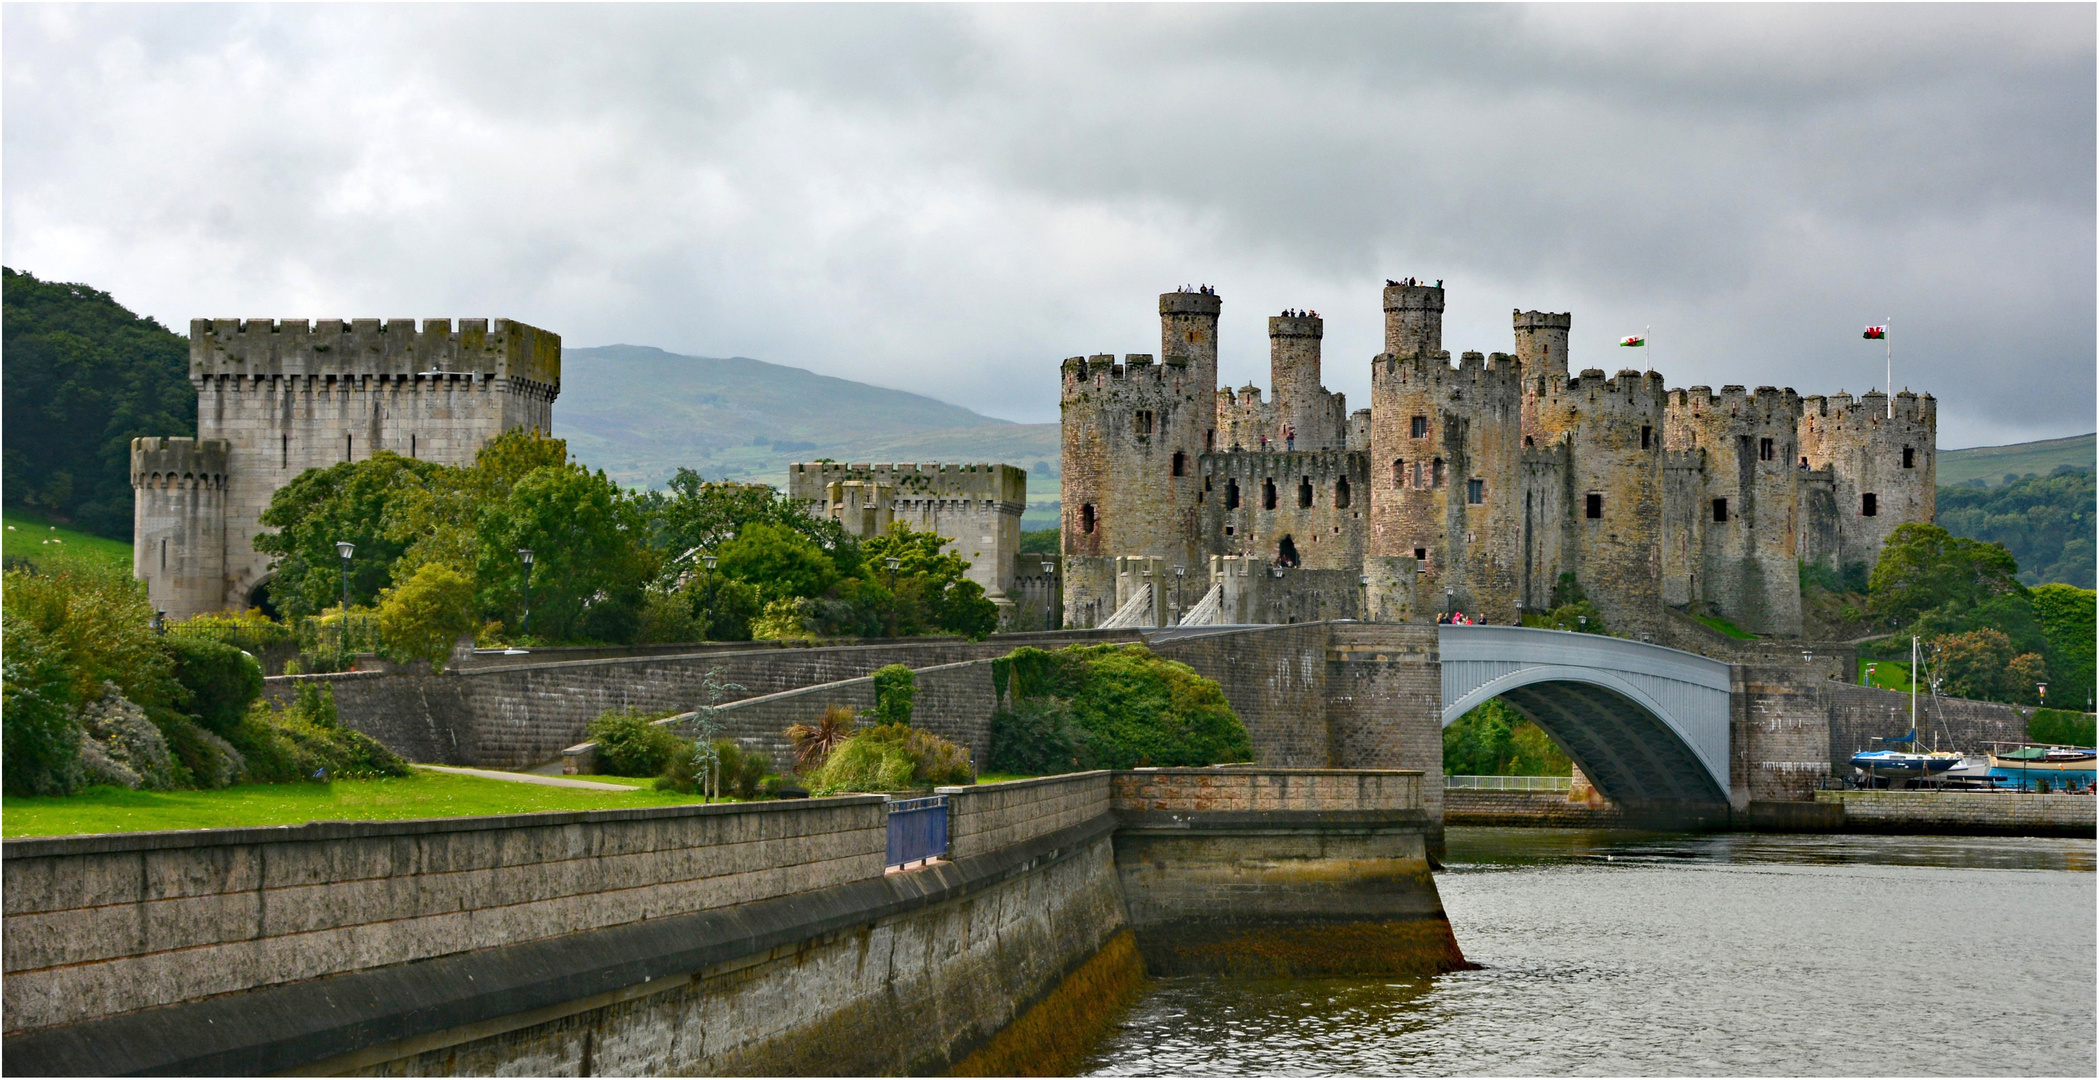 Conwy-Castle in Nordwales ...